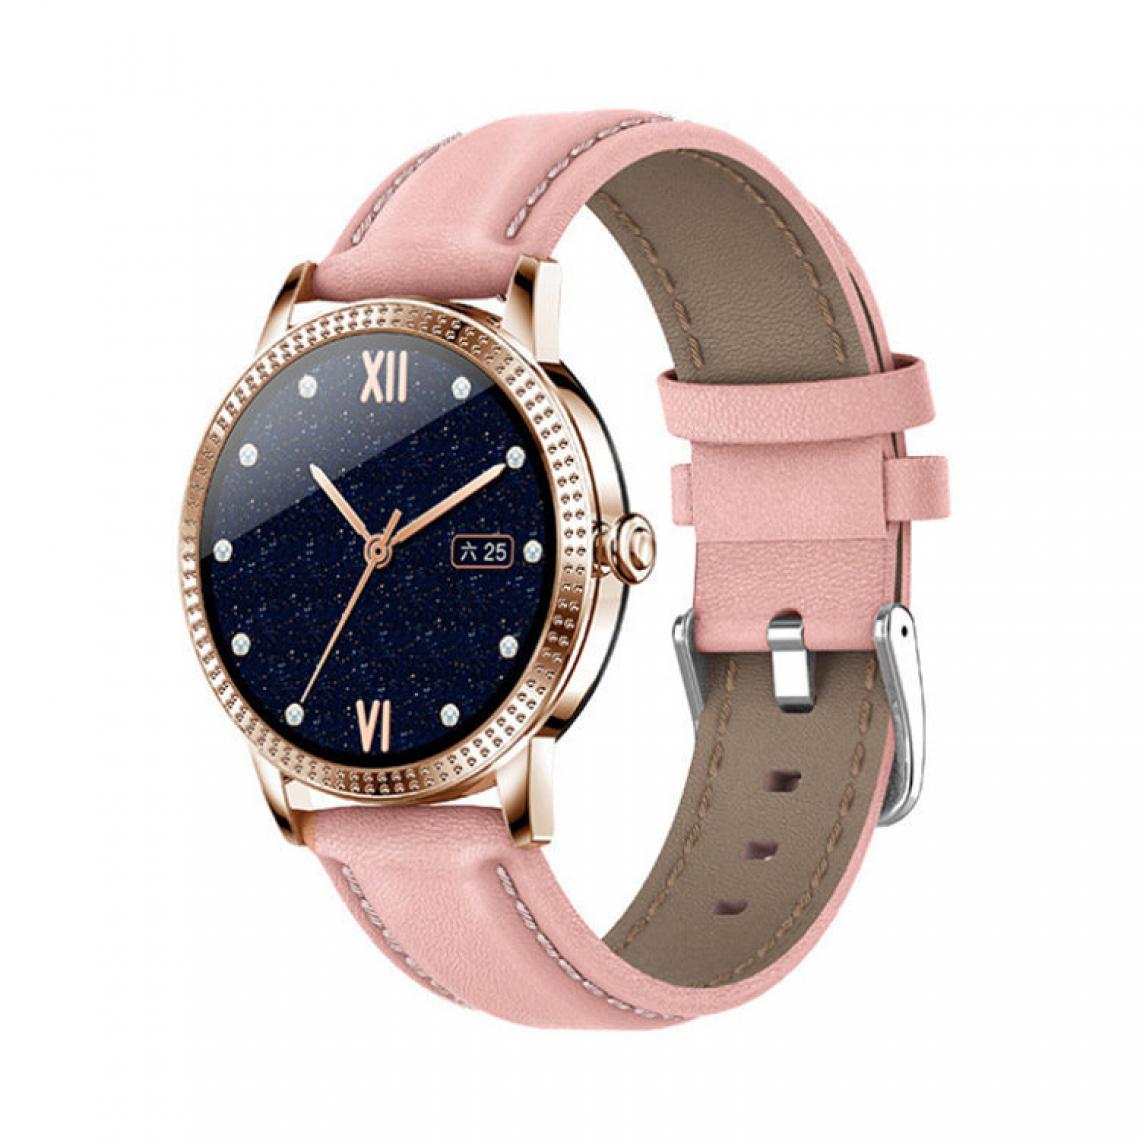 Chronotech Montres - Chronus Connected Watch Women, Smart Watch Man with Oximeter / Blood Pressure Monitor / Heart Rate Monitor(Rose) - Montre connectée